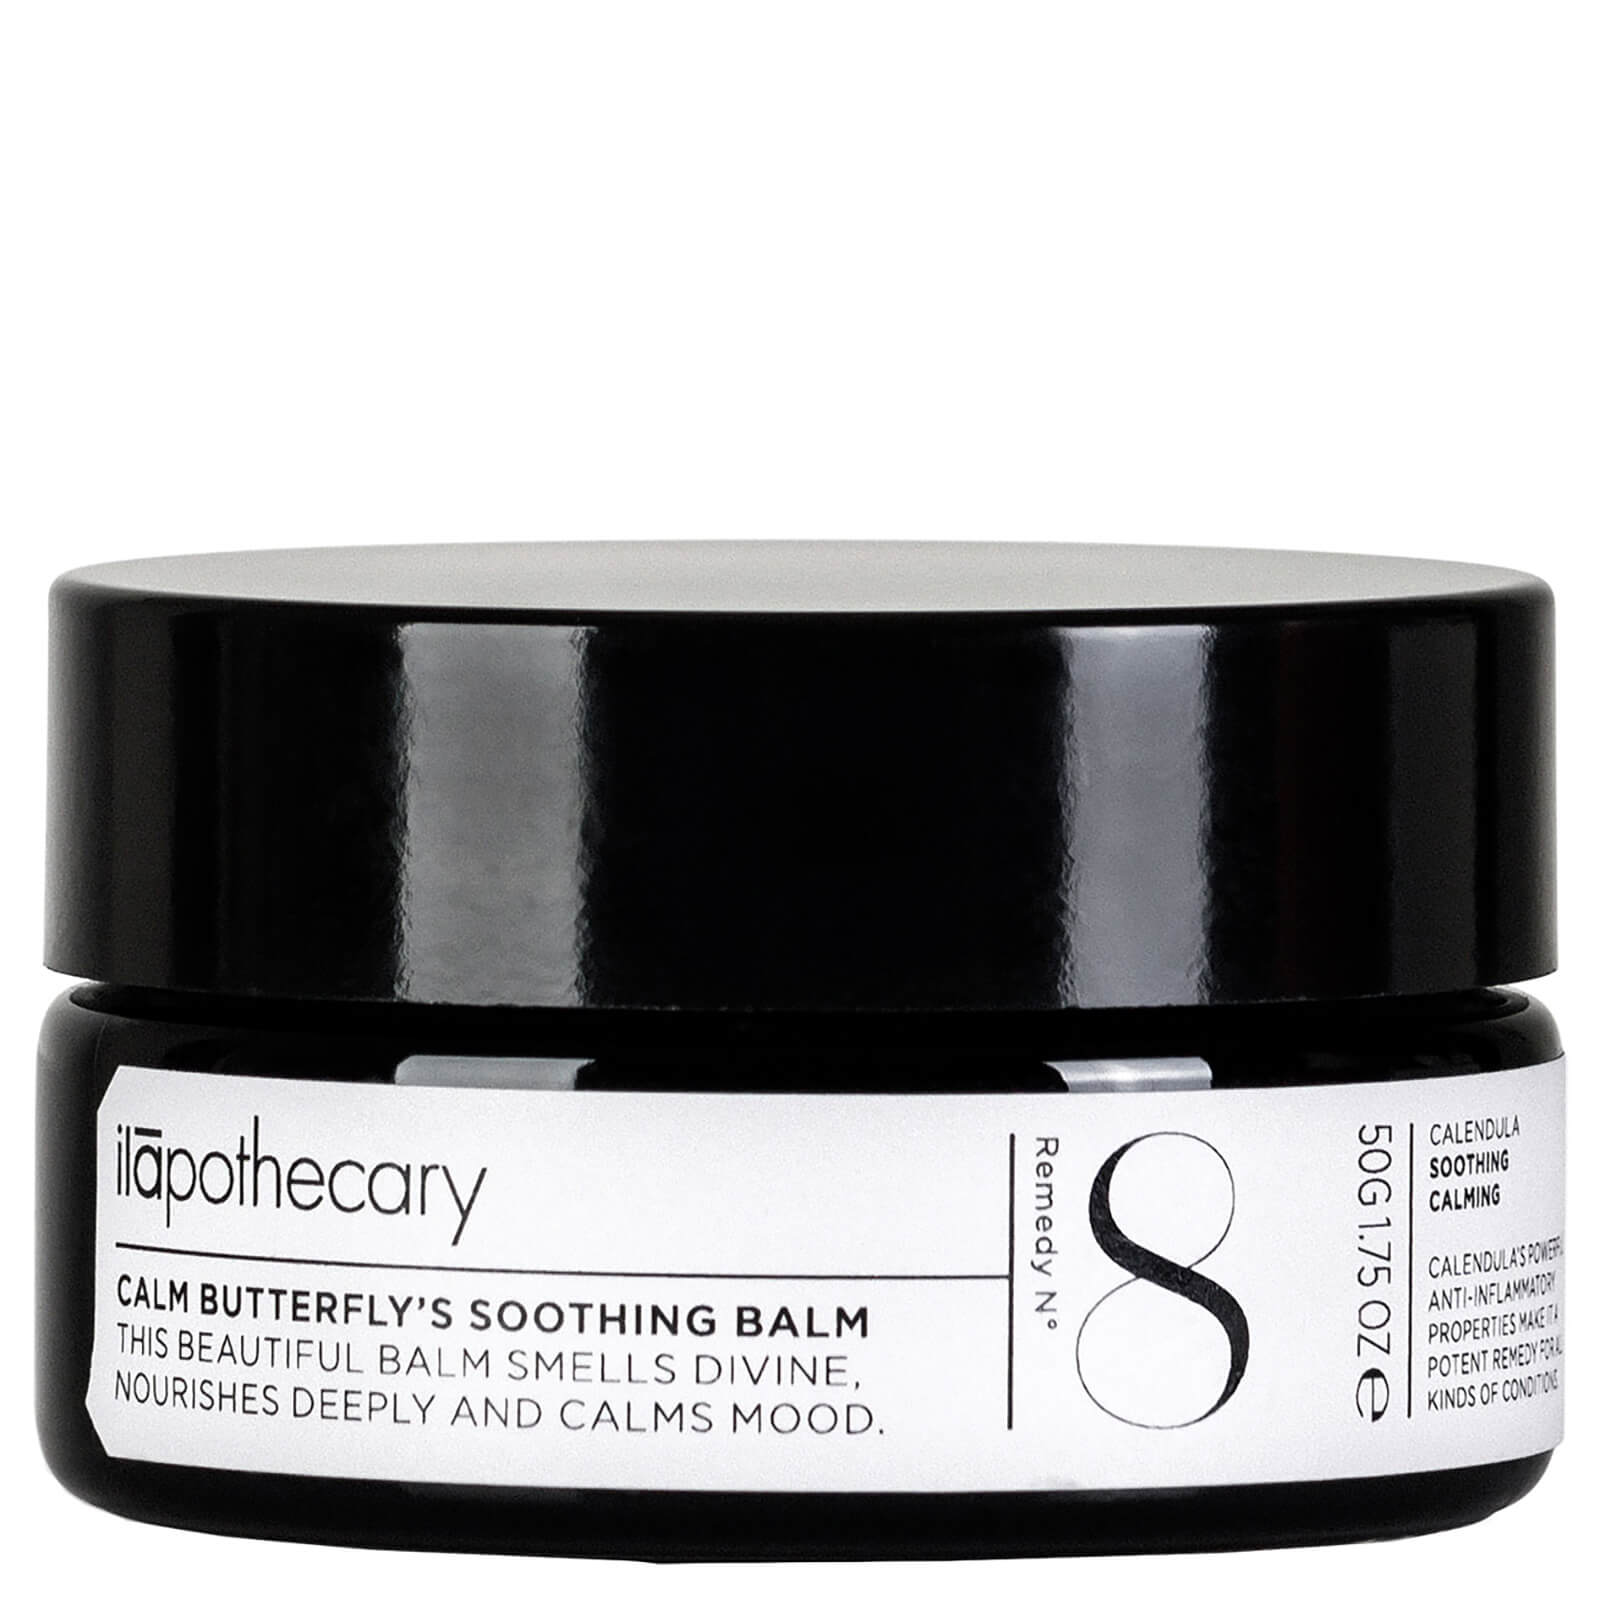 ilapothecary Calm Butterfly's Soothing Balm 50g